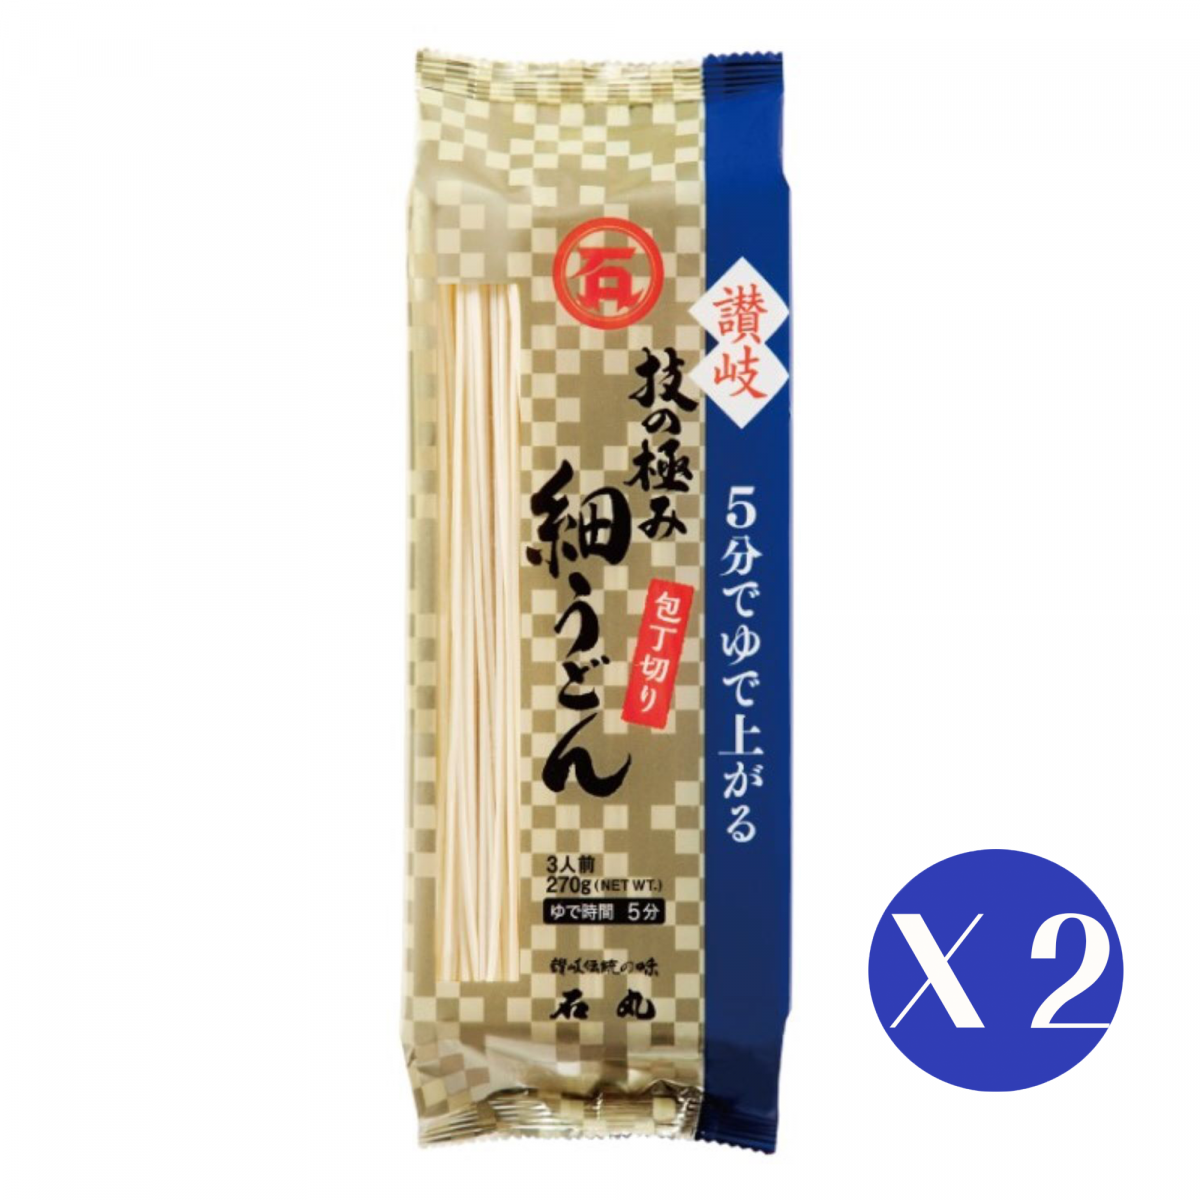 【2 Bags Offer】Sanuki Thin Udon-The Ultimate in Technique-Knife Cutter-(270g)(3meals)